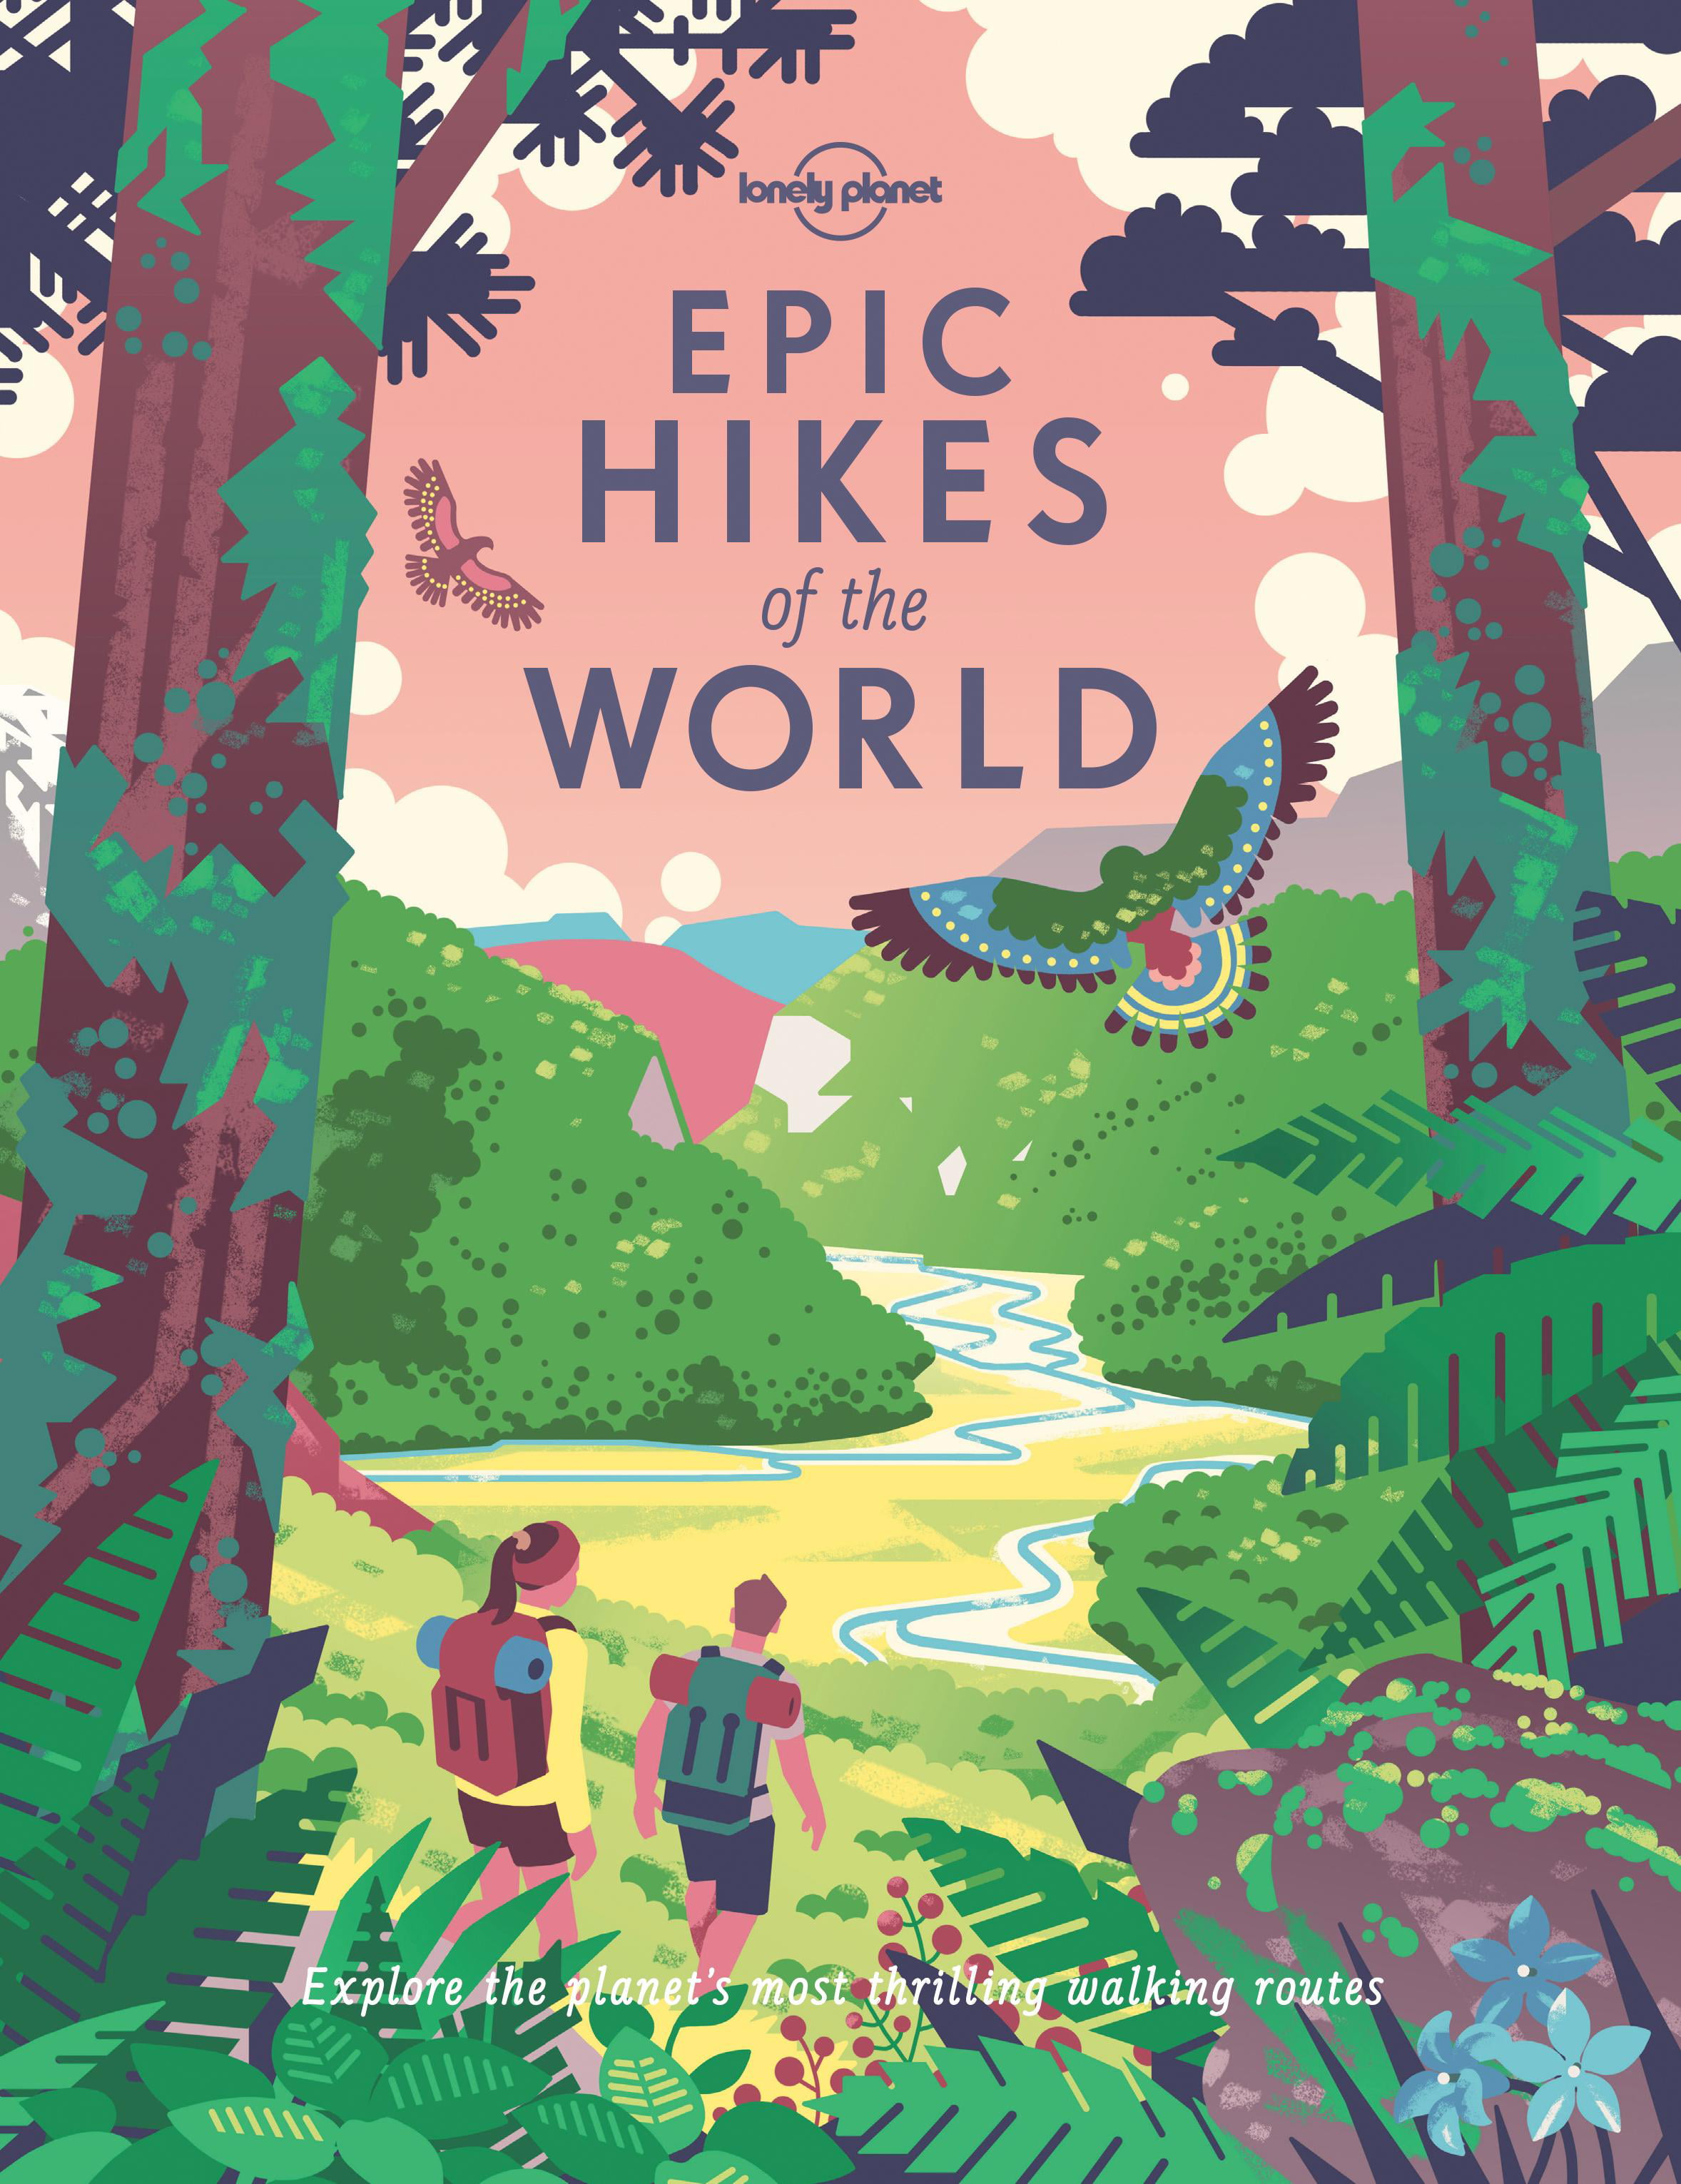 Lonely planet: epic hikes of the world - hardcover: 9781787014176 ...